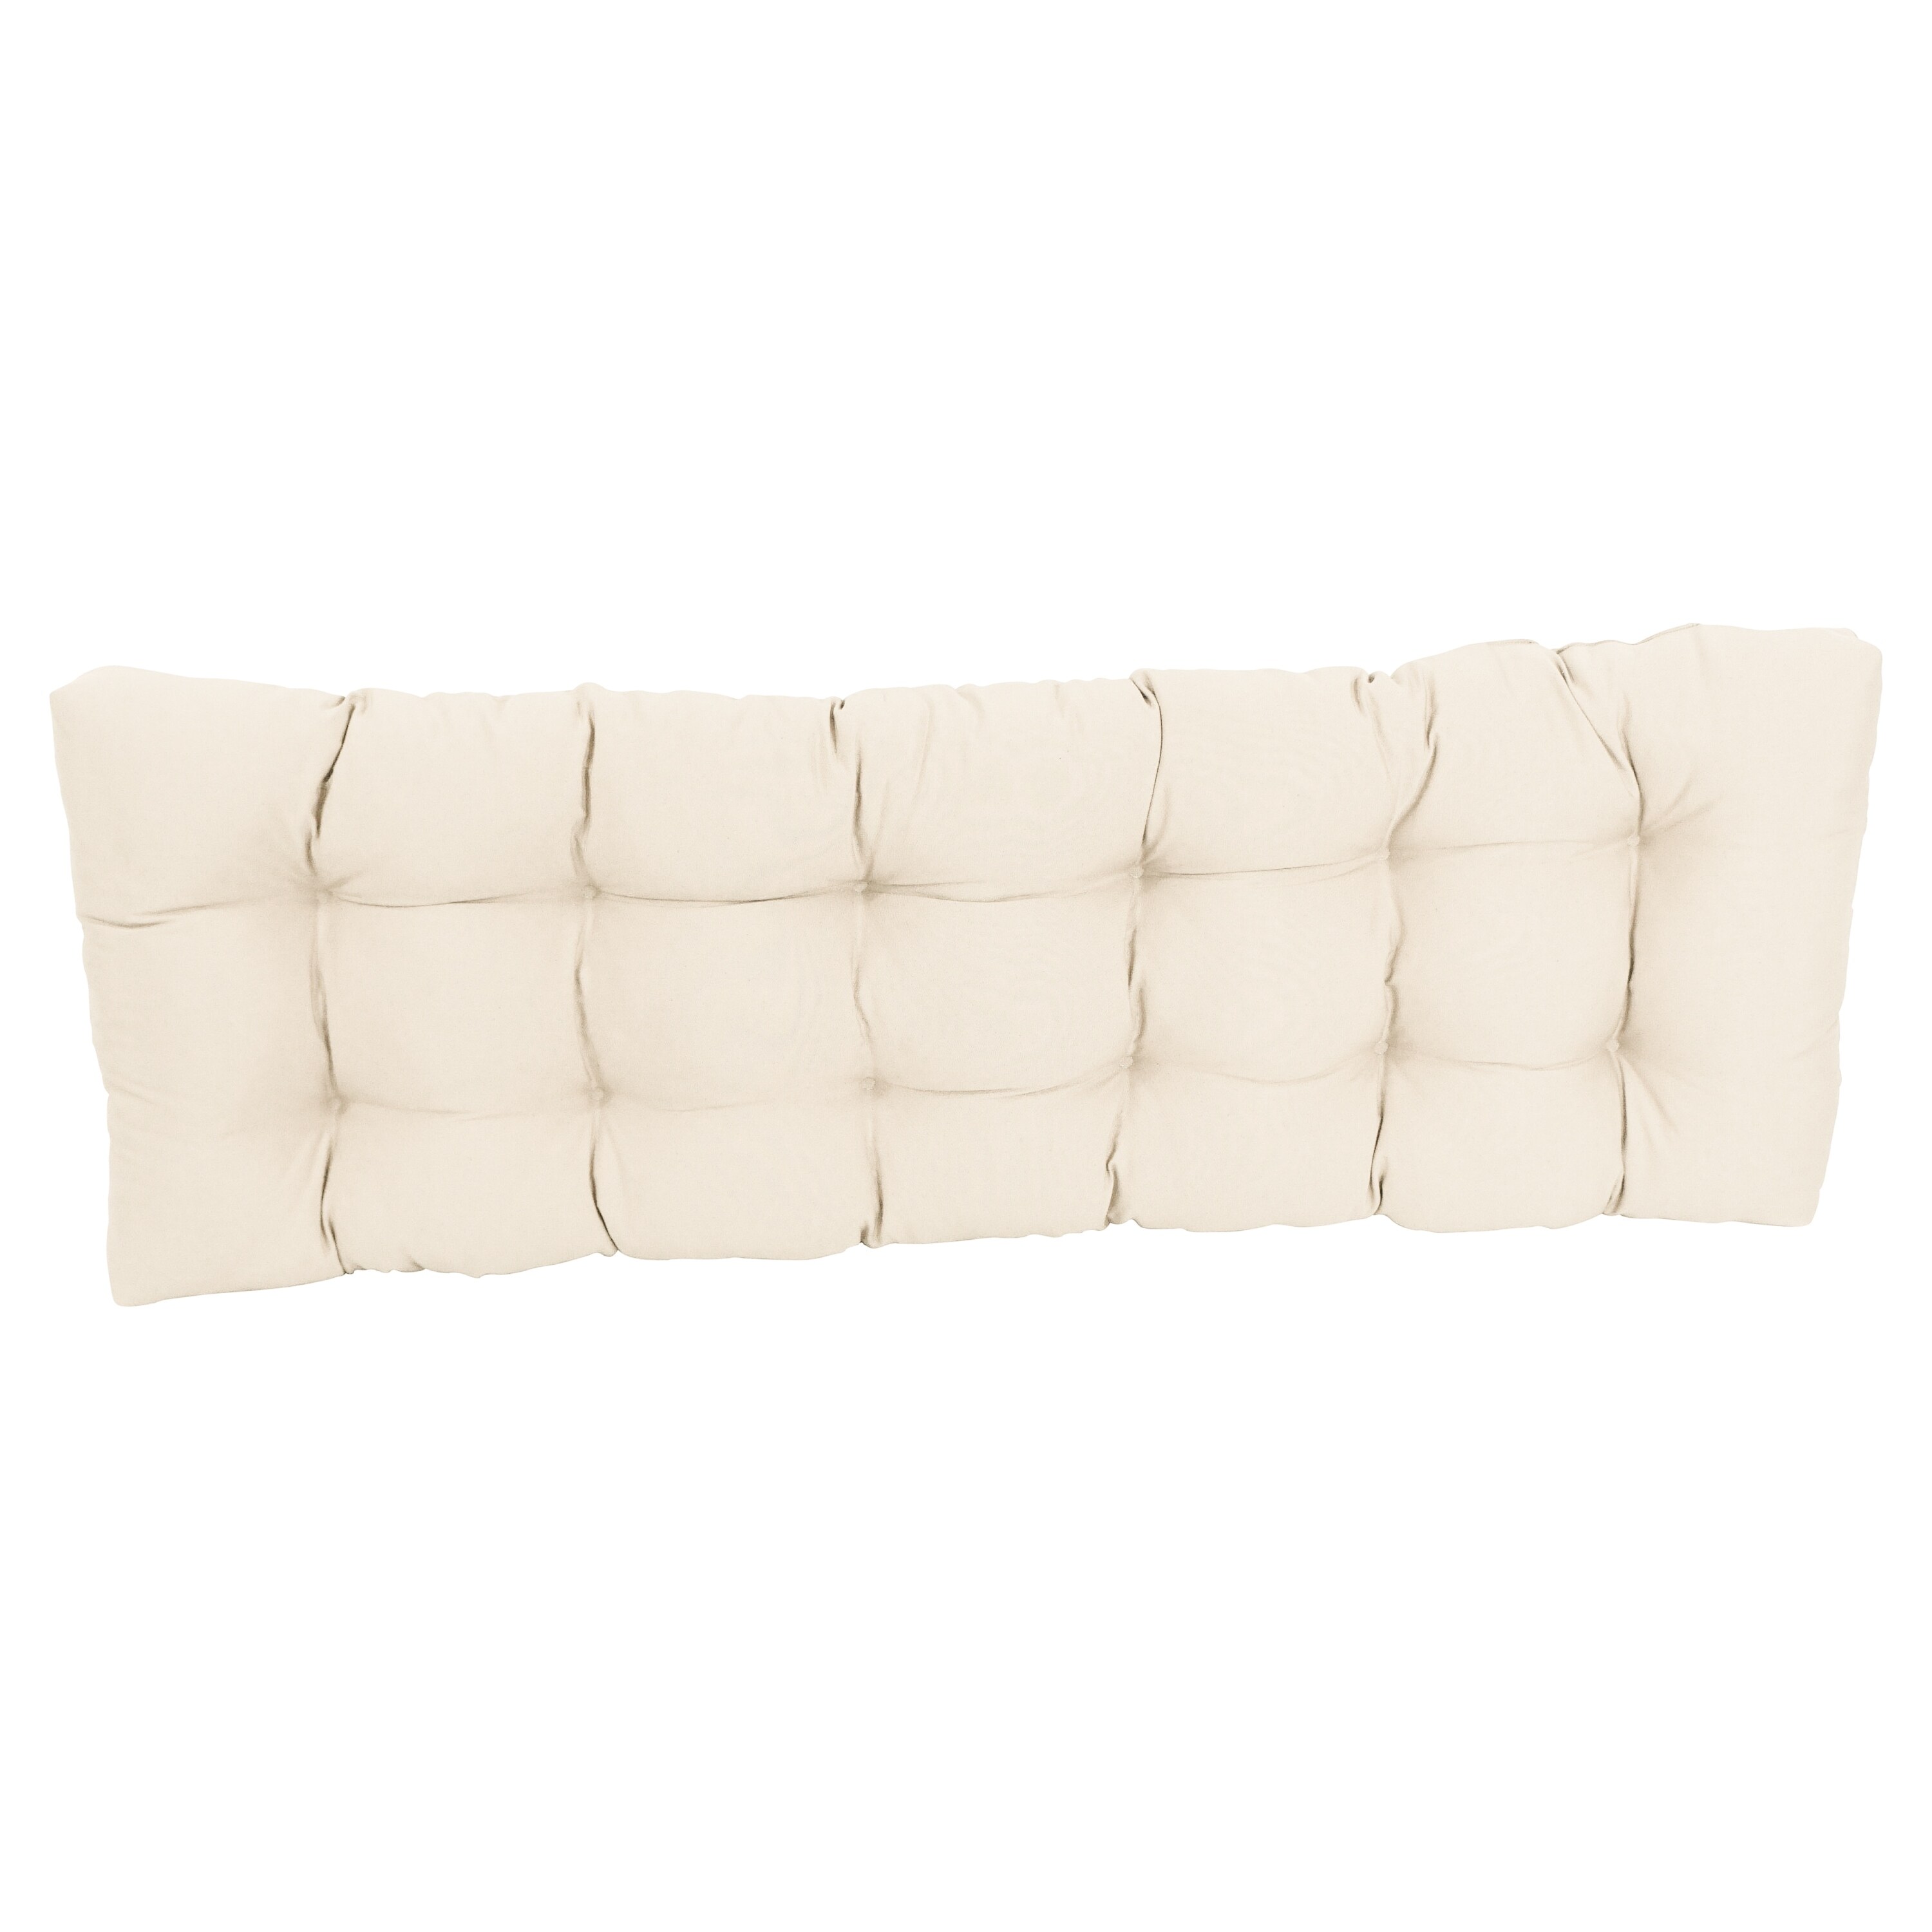 https://ak1.ostkcdn.com/images/products/is/images/direct/bf6782bfa7c71df55abe7fe216dfb6b1058cd359/Solid-Twill-Tufted-Indoor-Bench-Cushion-%28Multiple-widths-from-42-to-60-inch%29.jpg